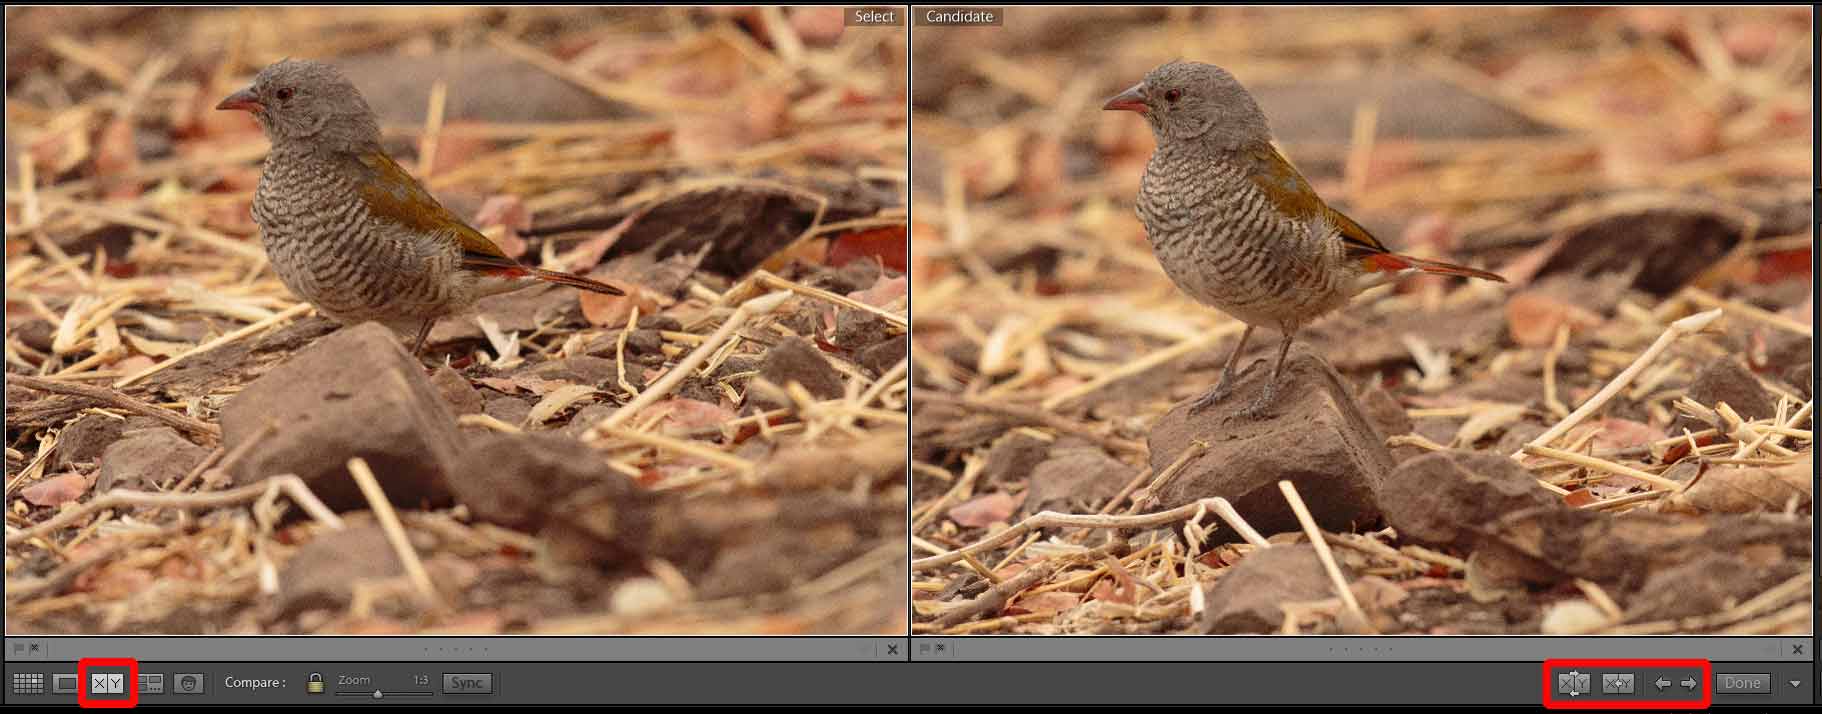 Comparing Photos Side by Side - Lightroom Interface